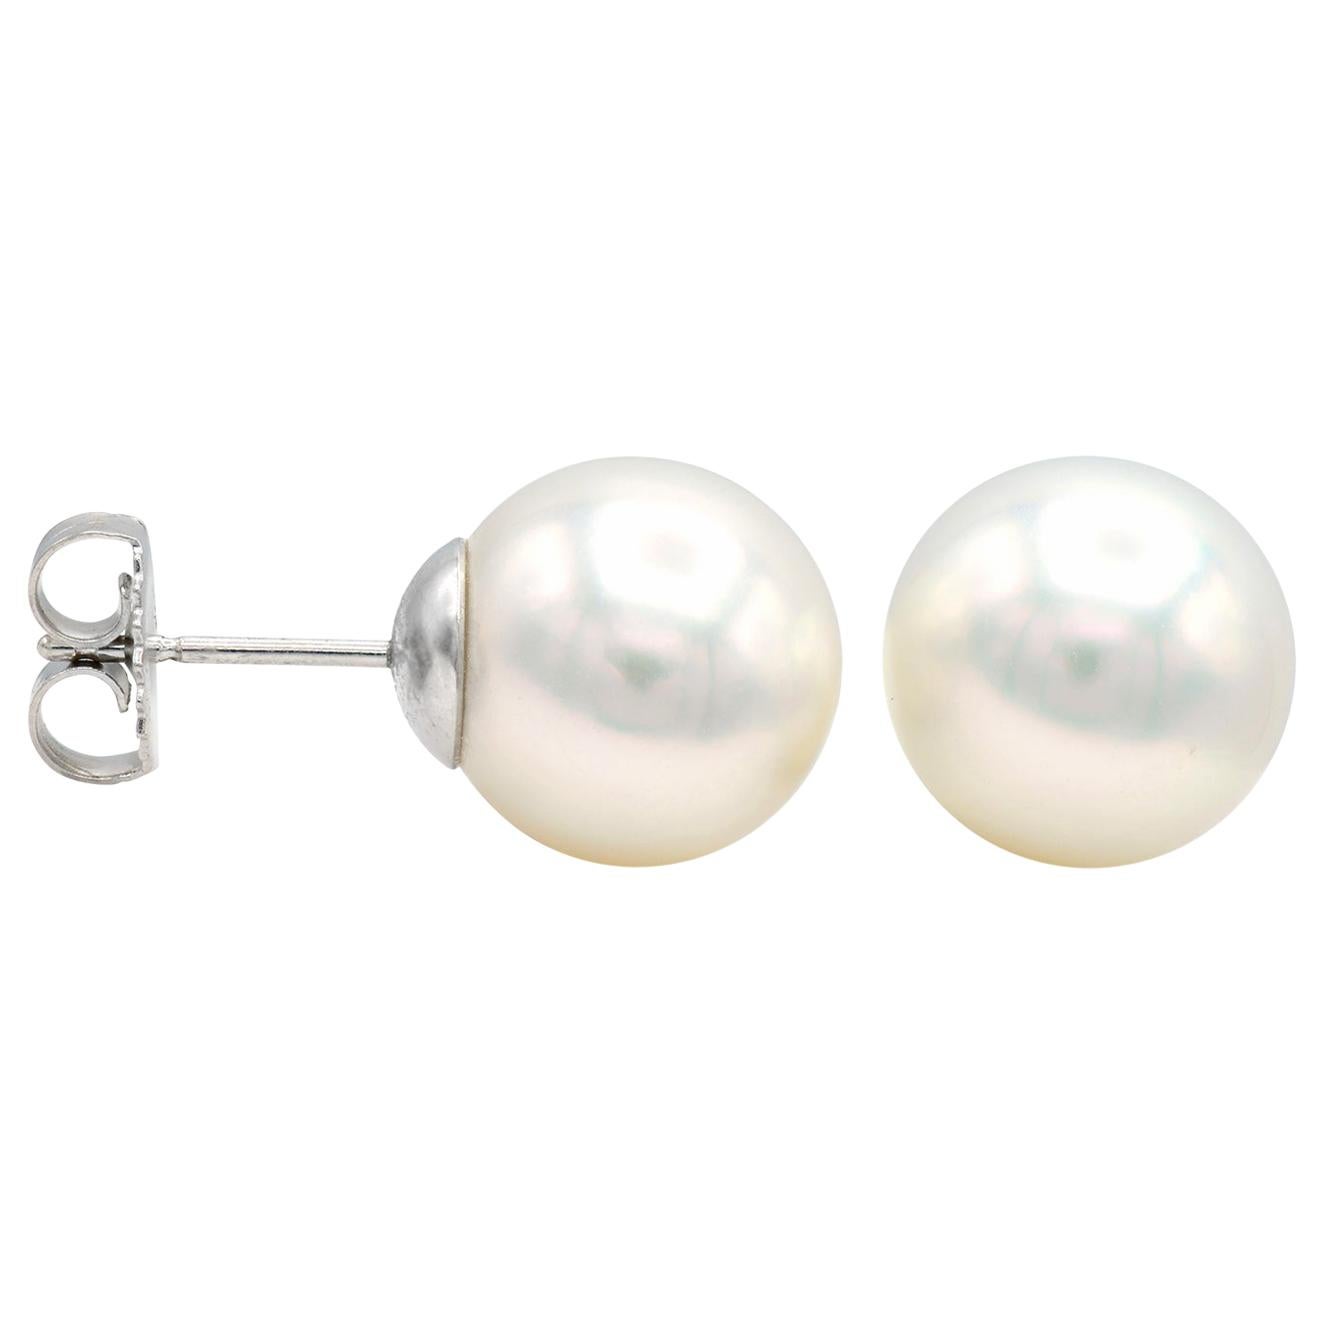 9.5-10mm South Sea Pearl Stud Earrings with 14 Karat White Gold Post and Back